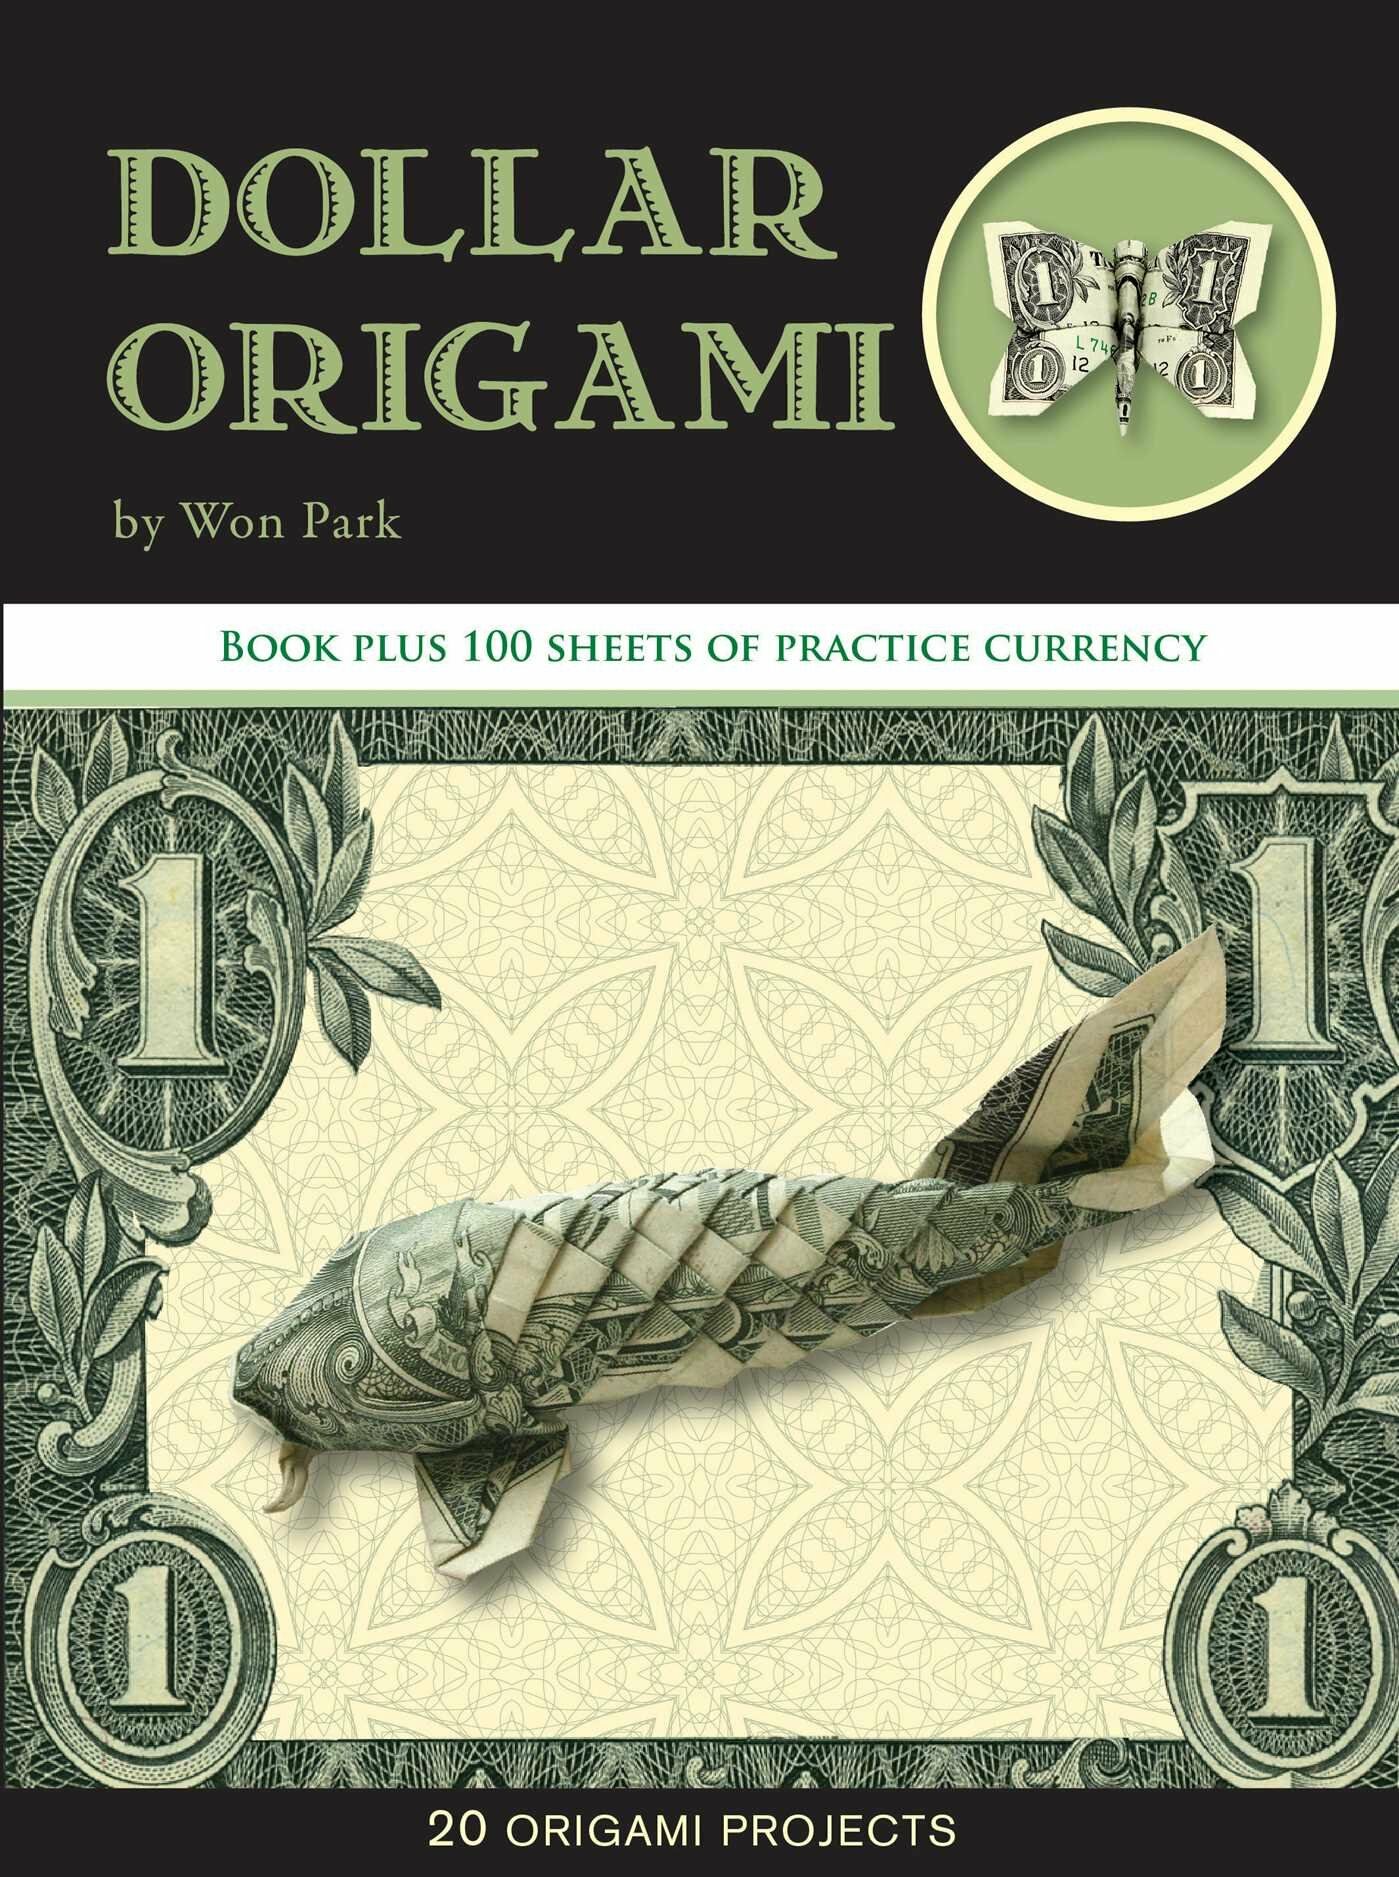 Dollar Origami: 10 Origami Projects Including the Amazing Koi Fish [With 100 Sheets] (Spiral)